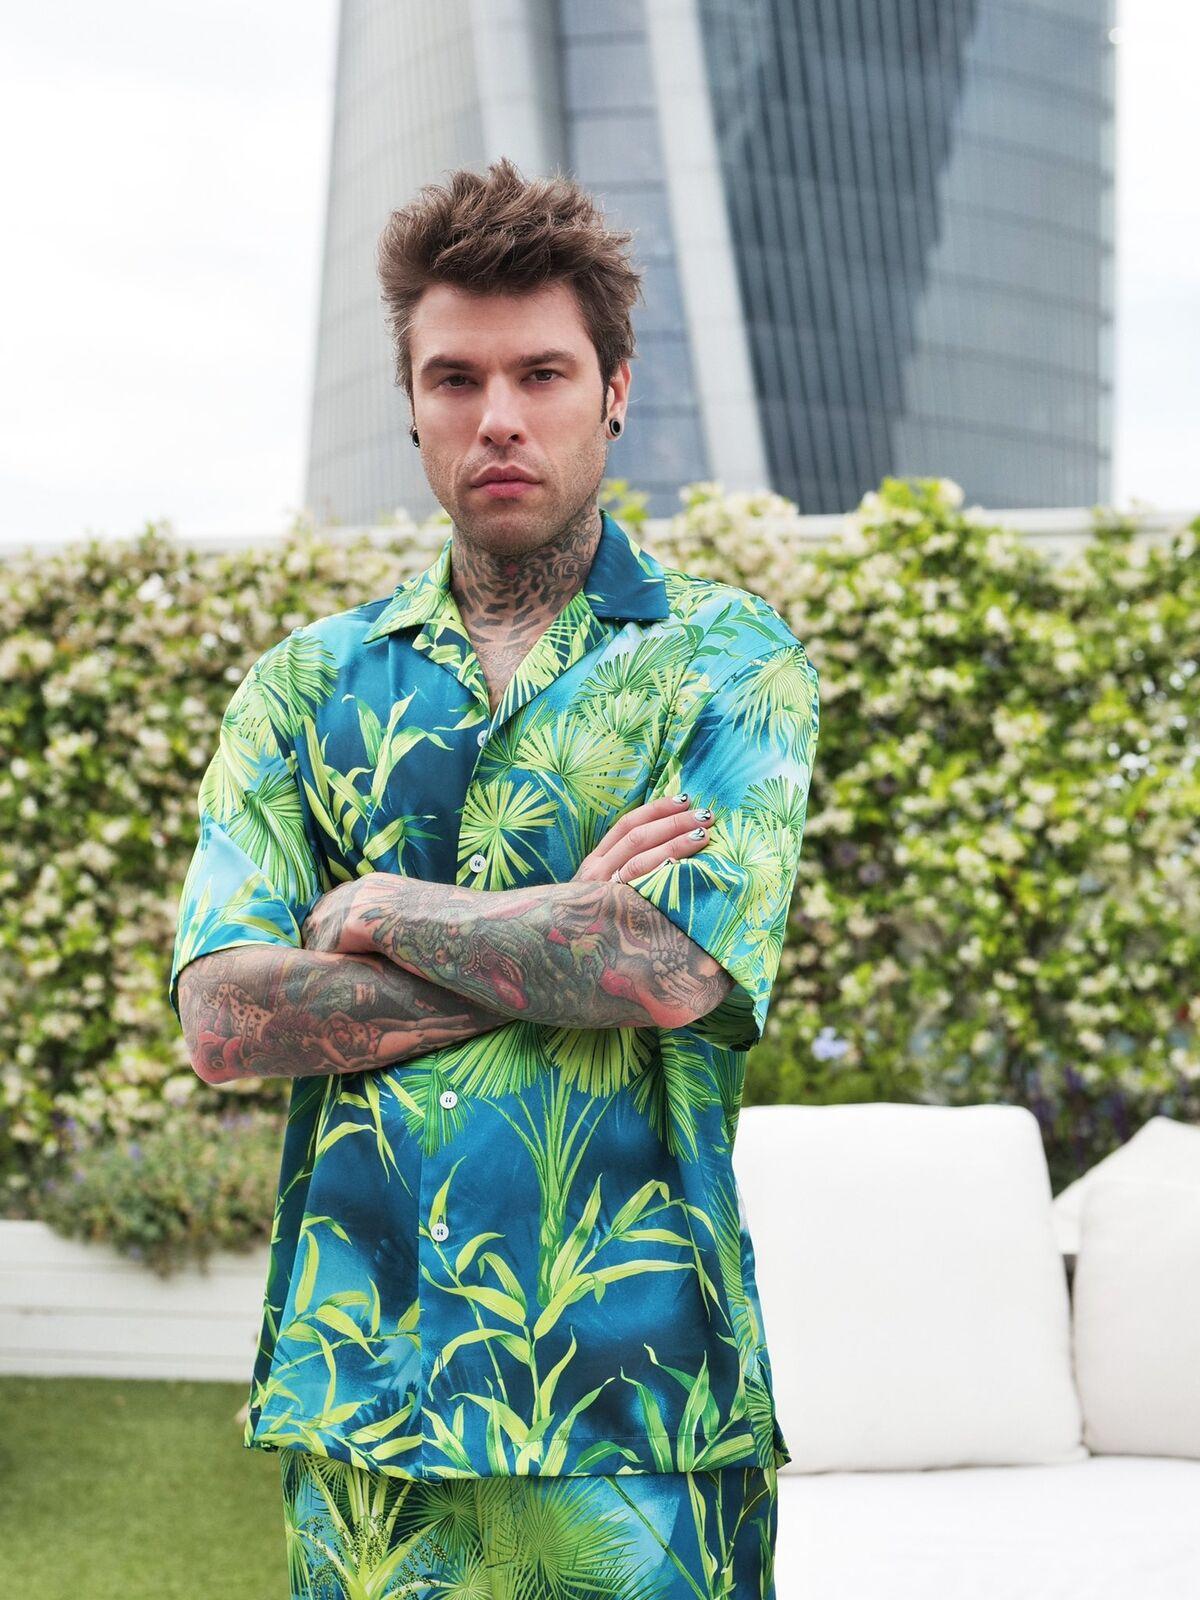 VERSACE 2020 Iconic JLo Jungle print green tropical print shirt EU38 S
Reference: TGAS/C01004
Brand: Versace
Designer: Donatella Versace
Model: Jungle shirt
Collection: Spring Summer 2020 Jungle Collection
As seen on: Fedez, Robbie